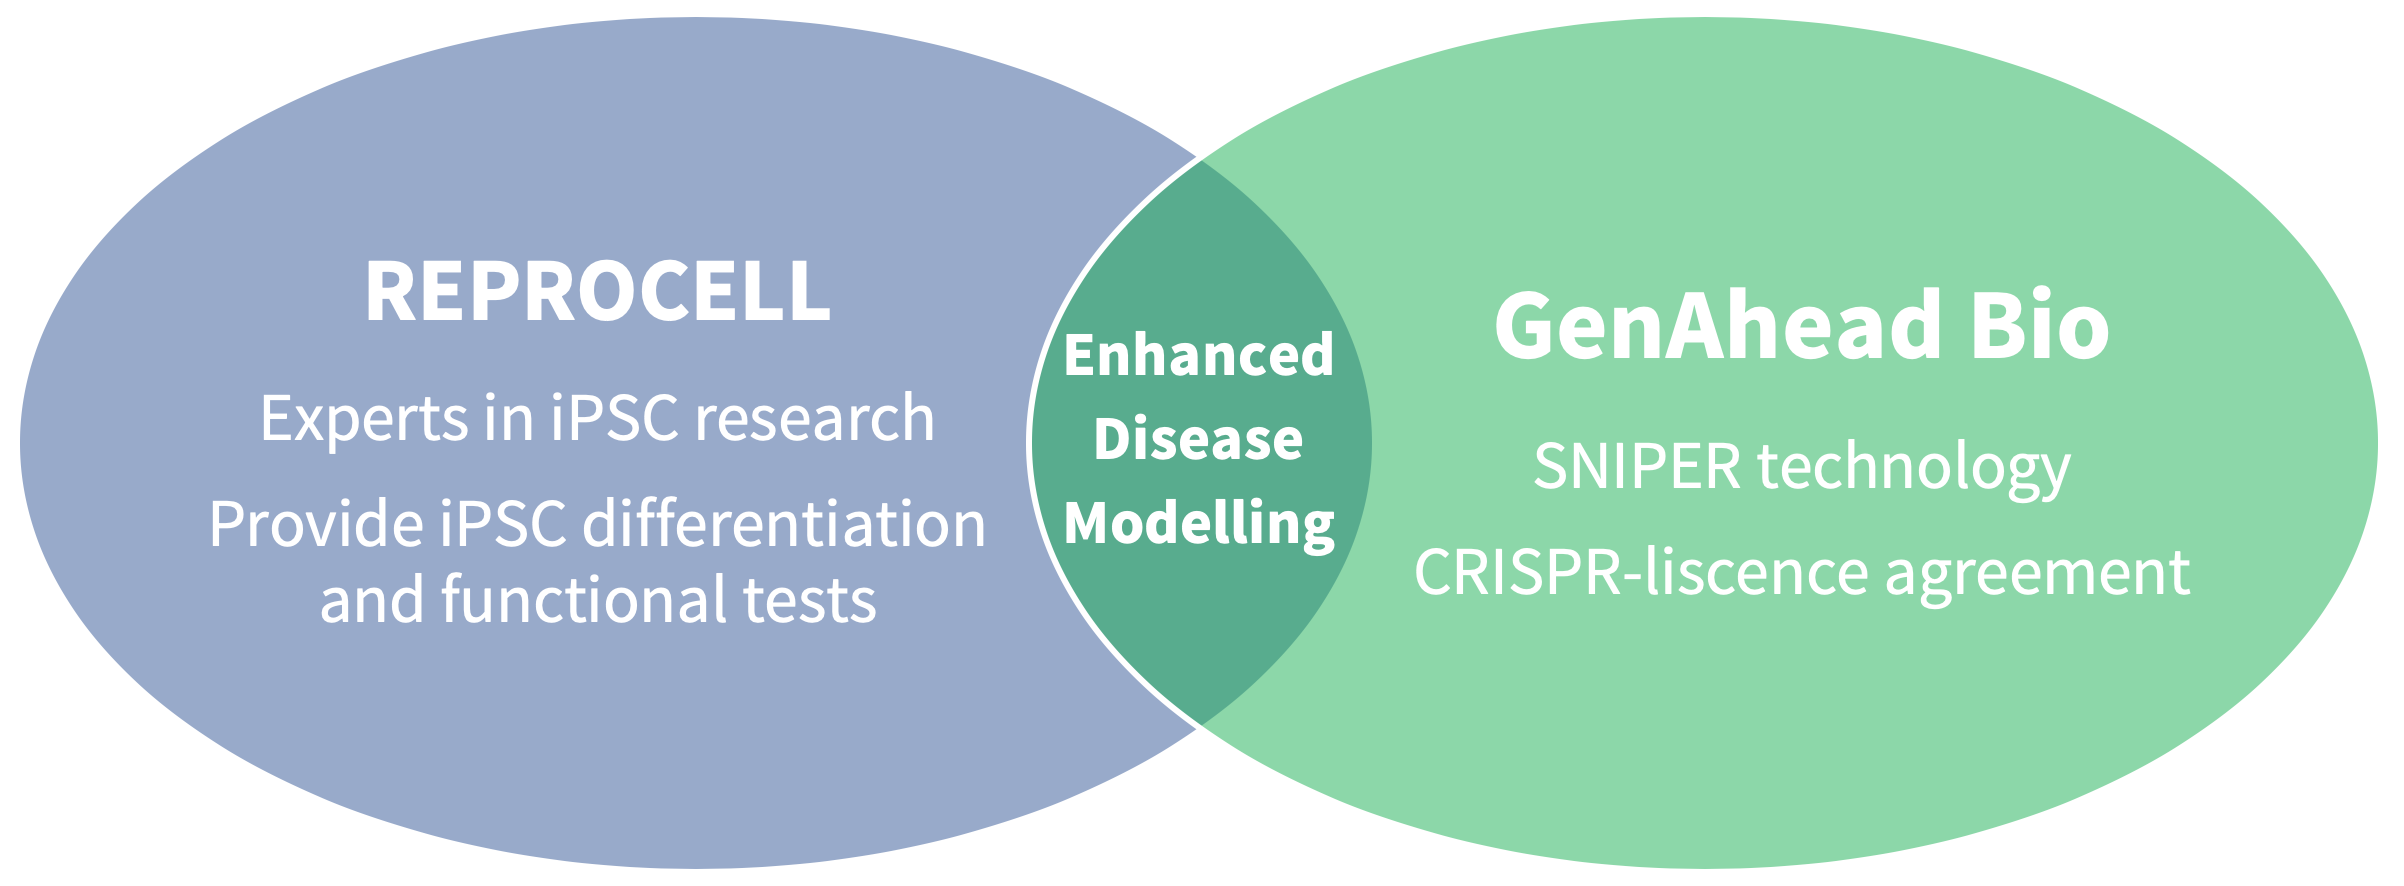 By combining the stem cell expertise of REPROCELL with the gene editing knowledge of GenAhead Bio, researchers can now access CRIPSR-SNIPER gene editing of iPSC cells.